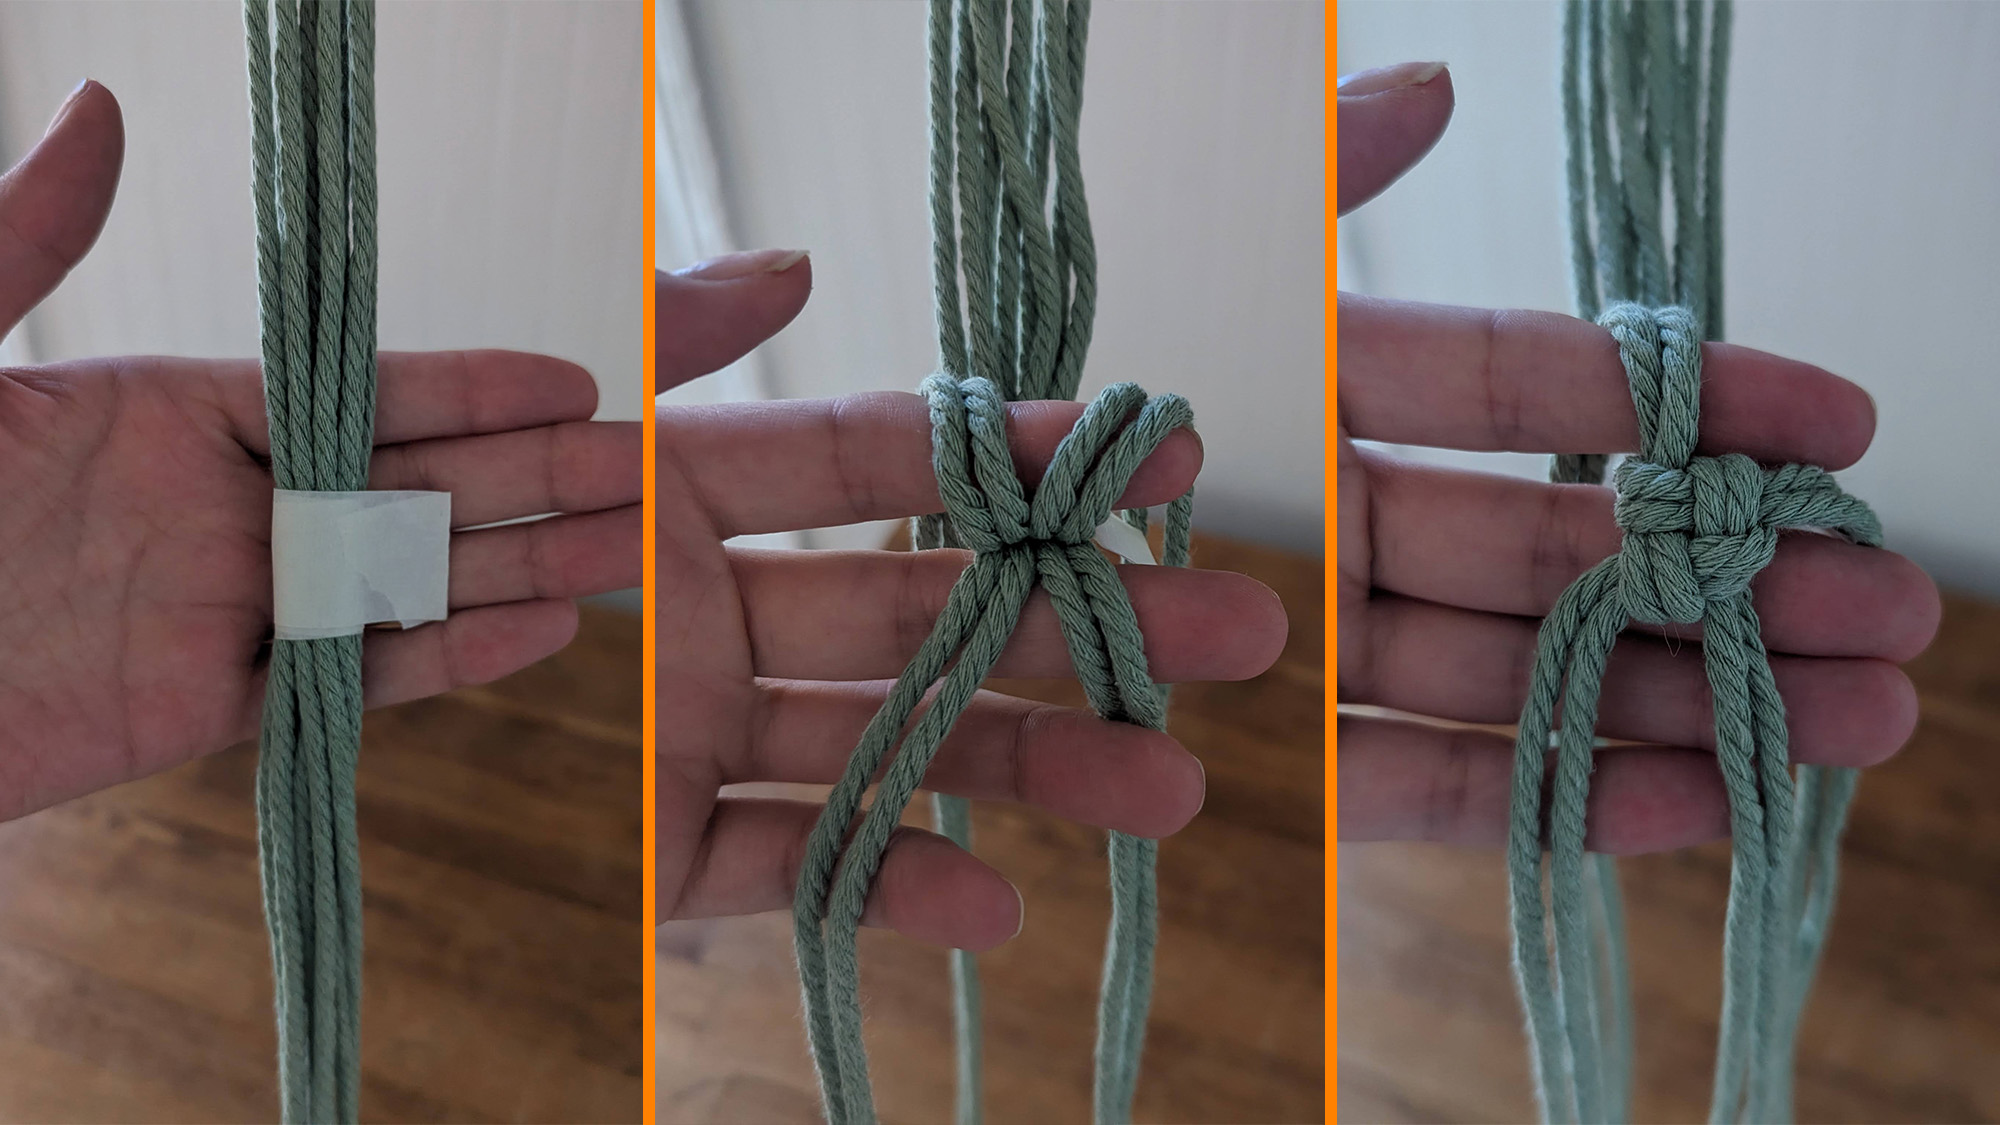 Starting the second spiral lanyard in your DIY hanging planter